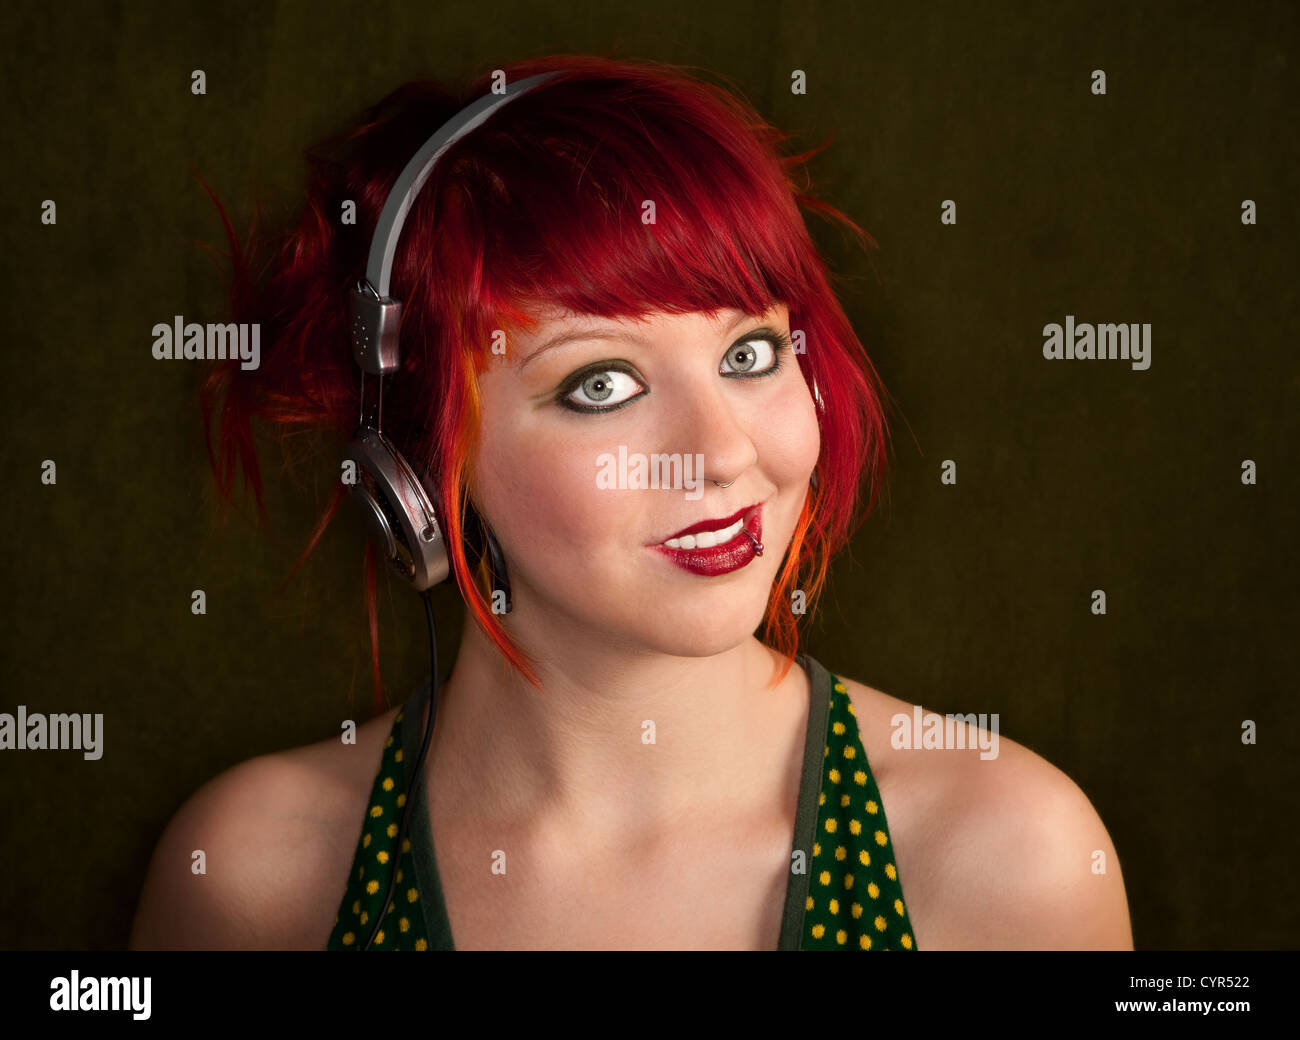 Pretty punky girl with brightly dyed red hair listening to music Stock Photo